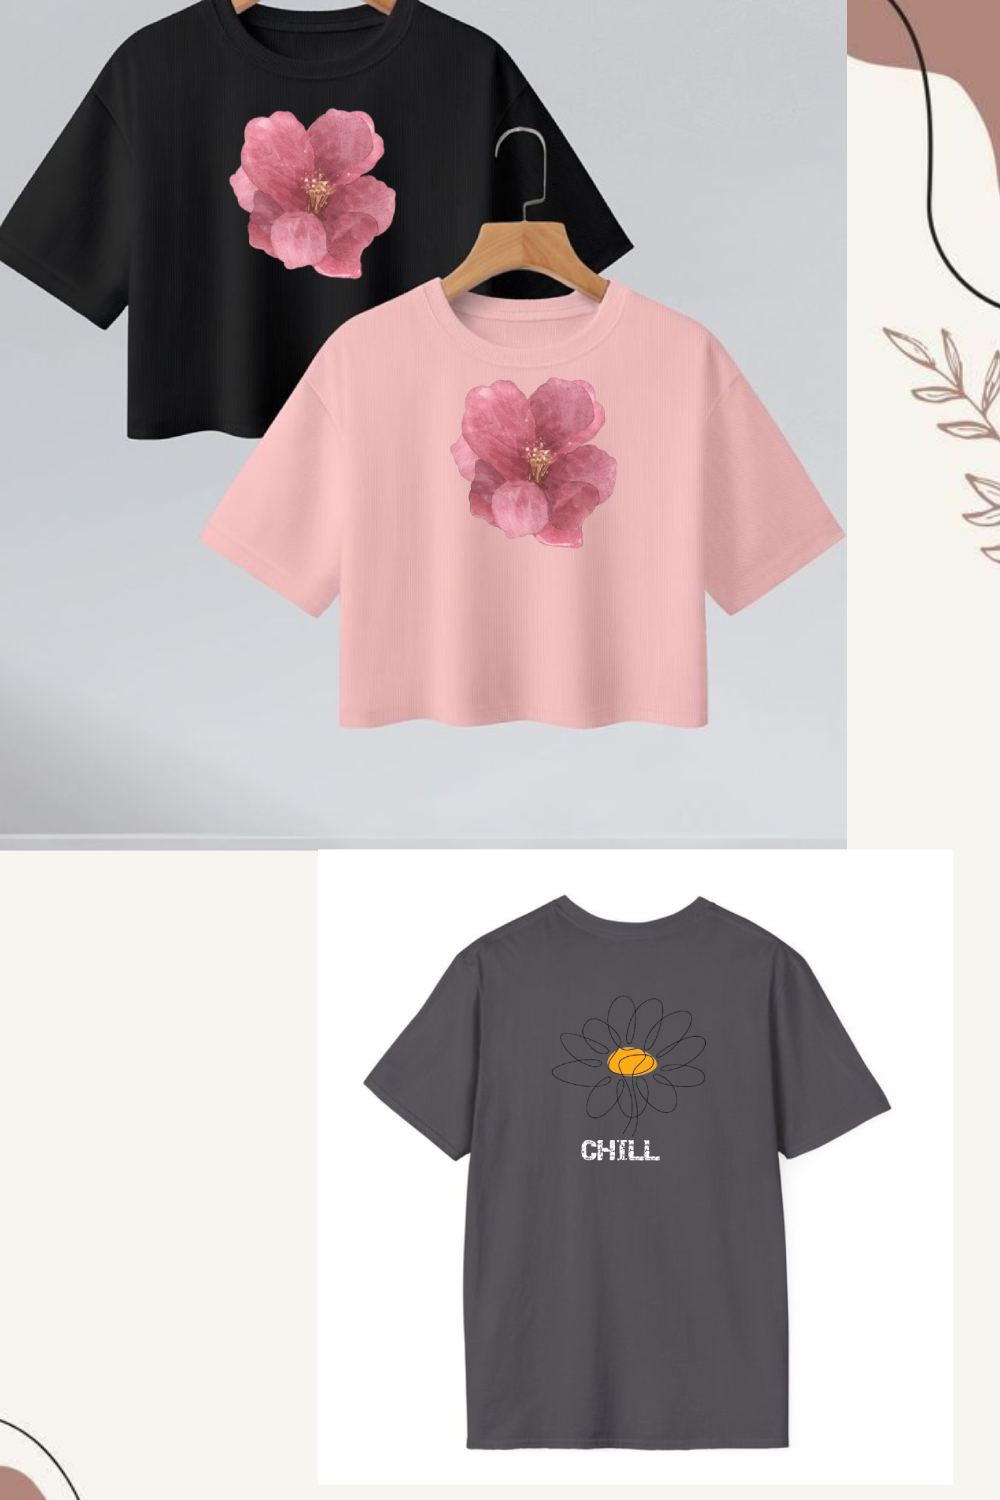 flower aesthethic shirts pinterest preview image.